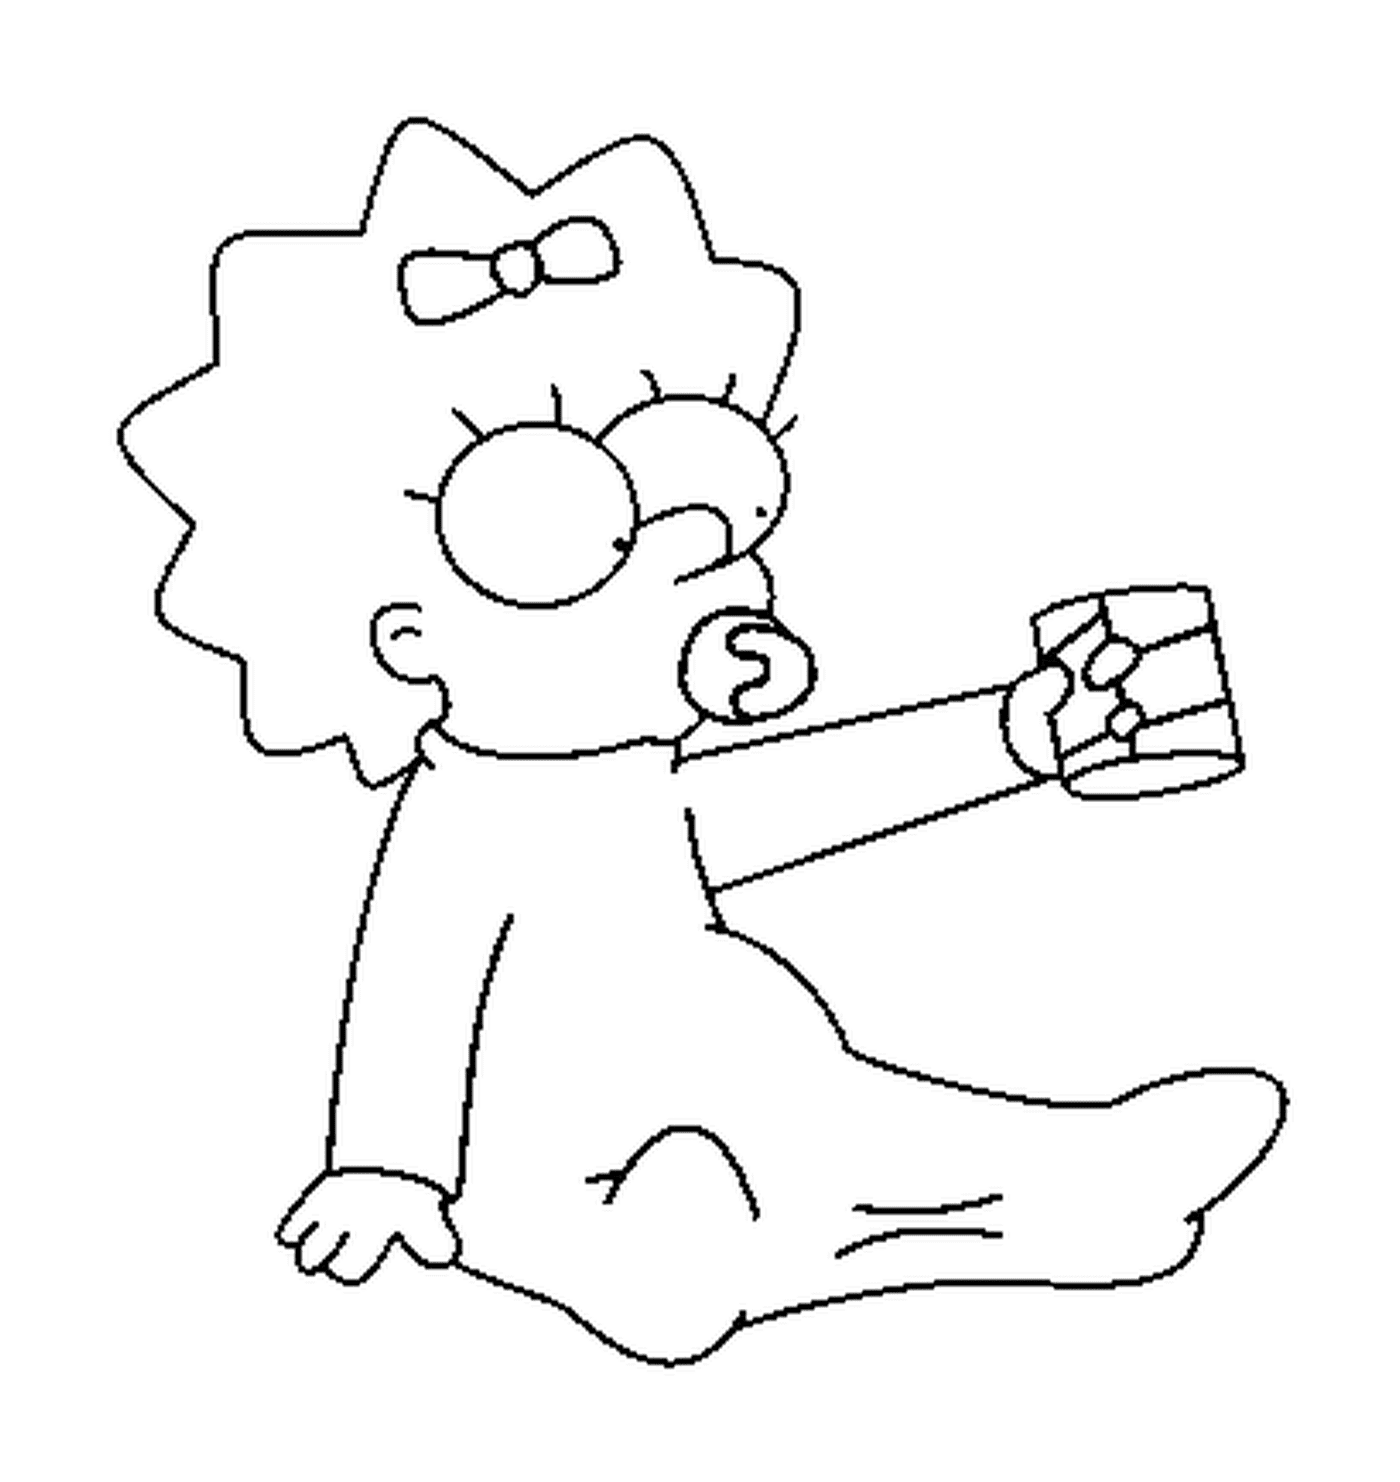  Maggie Simpson, beloved character 